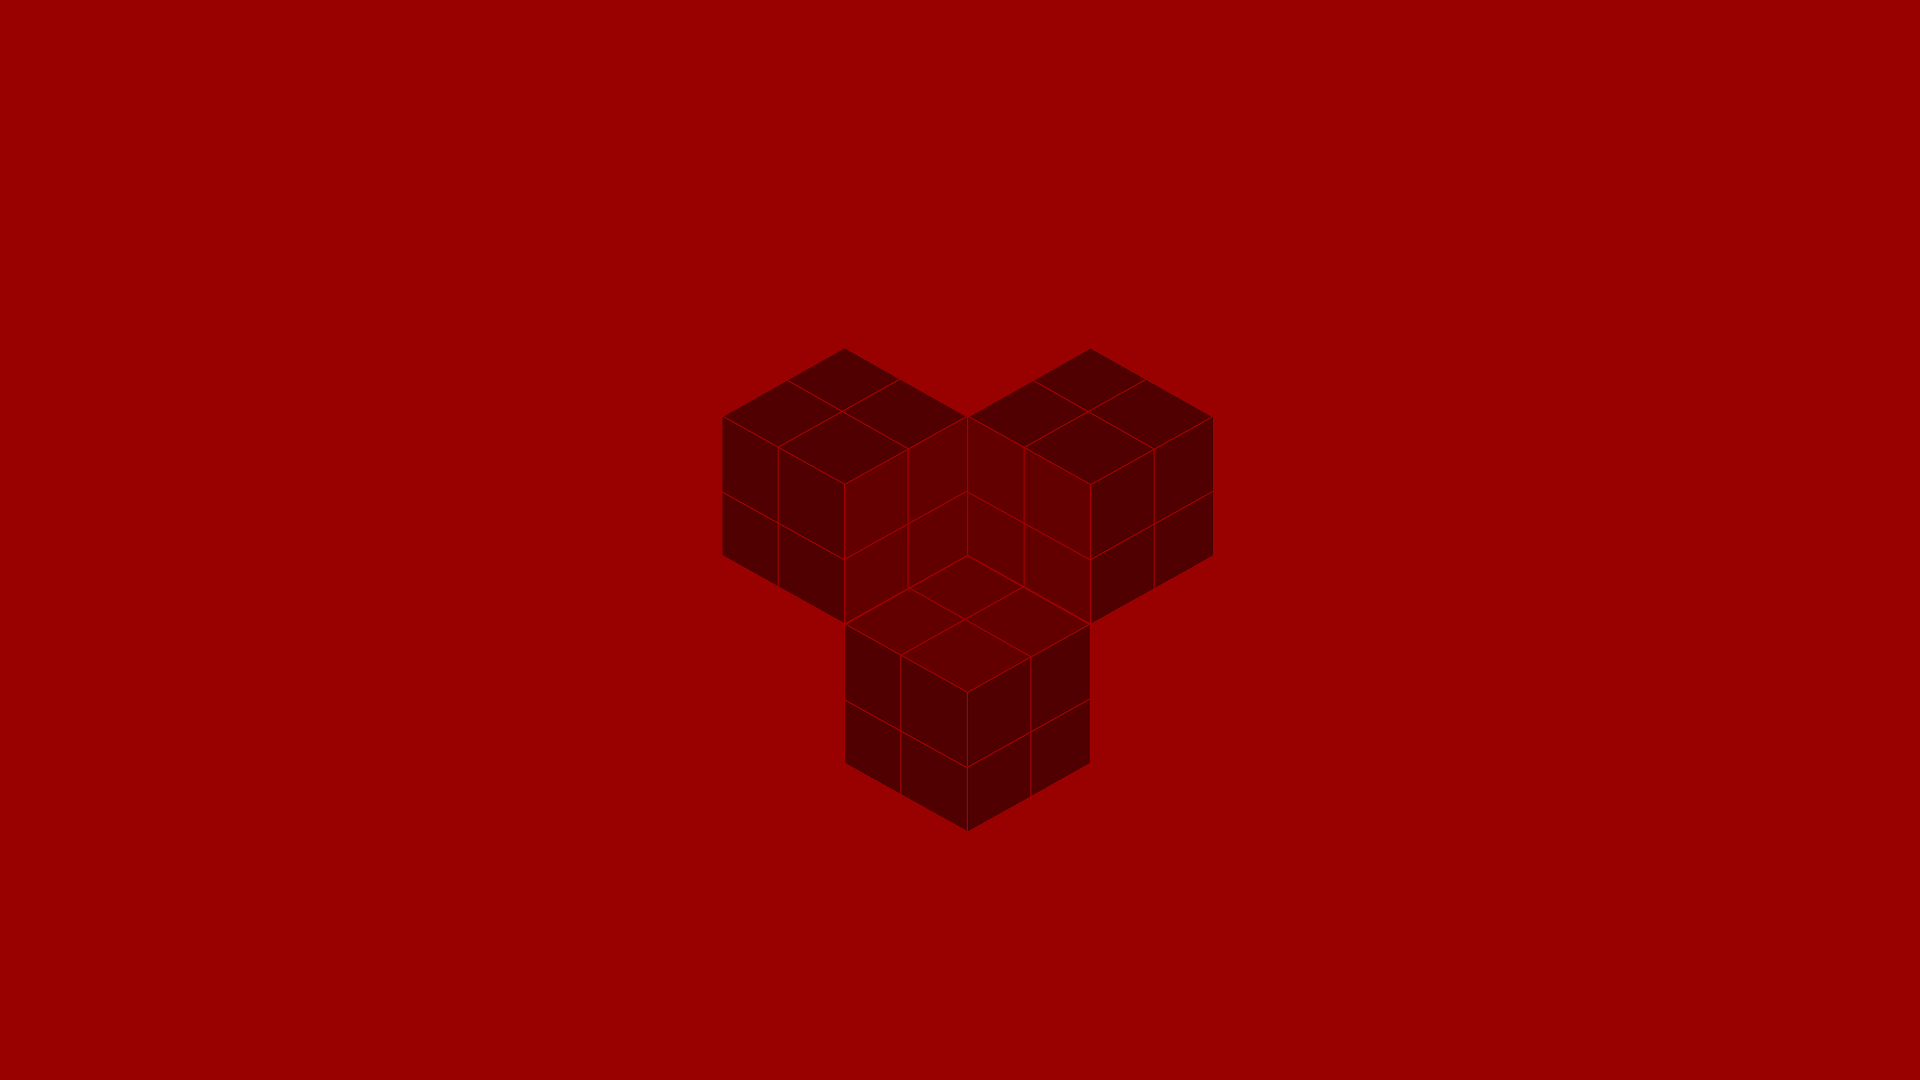 General 1920x1080 digital art cube minimalism simple background red background 3D Blocks abstract 3D Abstract CGI red